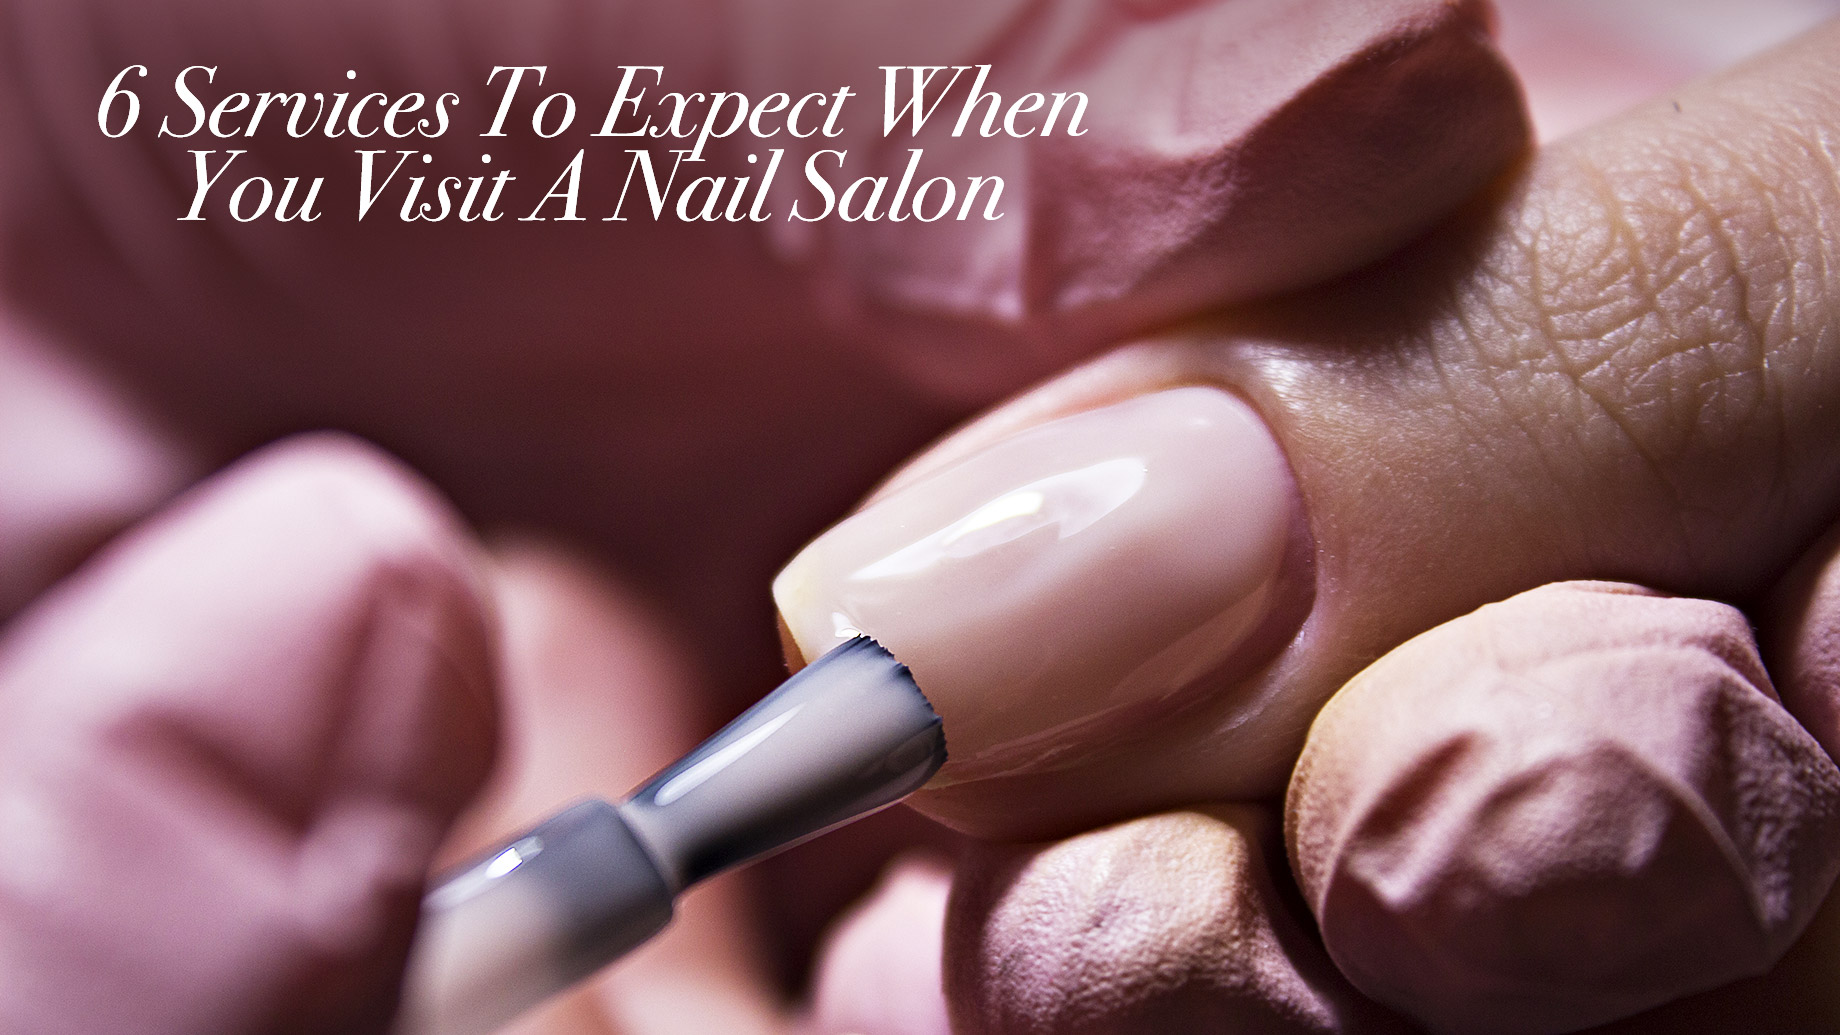 6 Services To Expect When You Visit A Nail Salon – The Pinnacle List